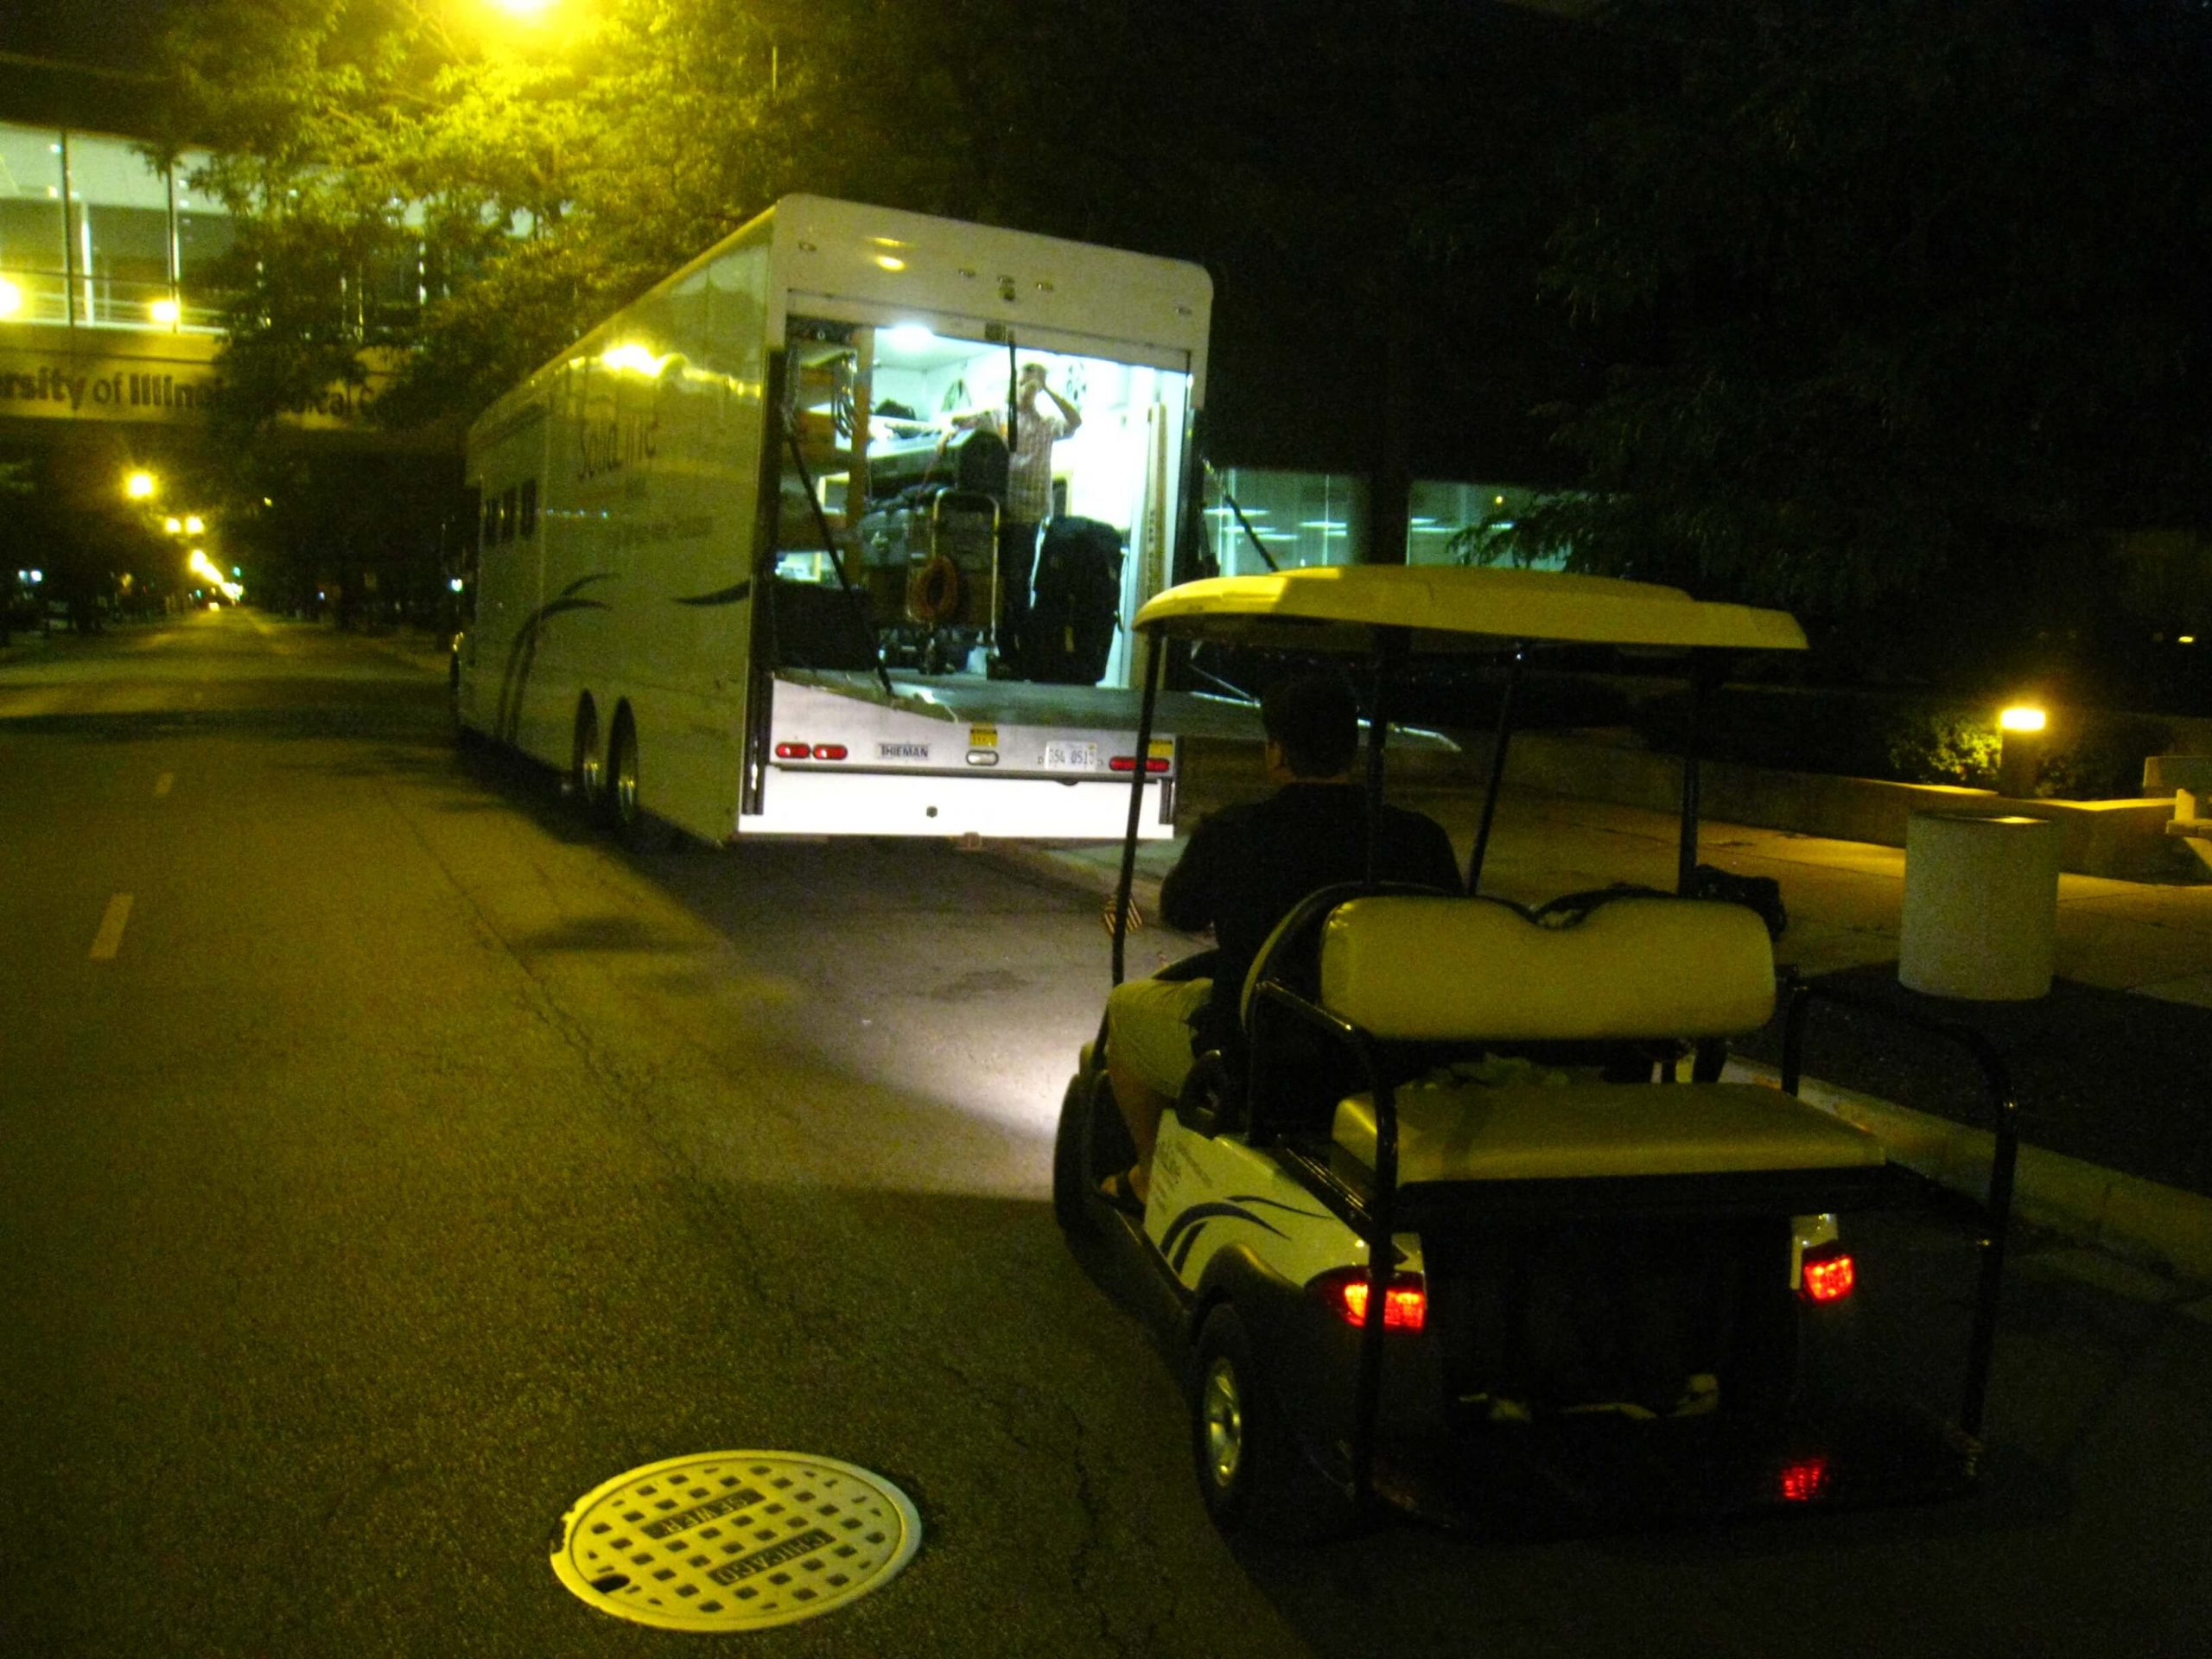 Here are the new golf cart lights in action in Chicago...